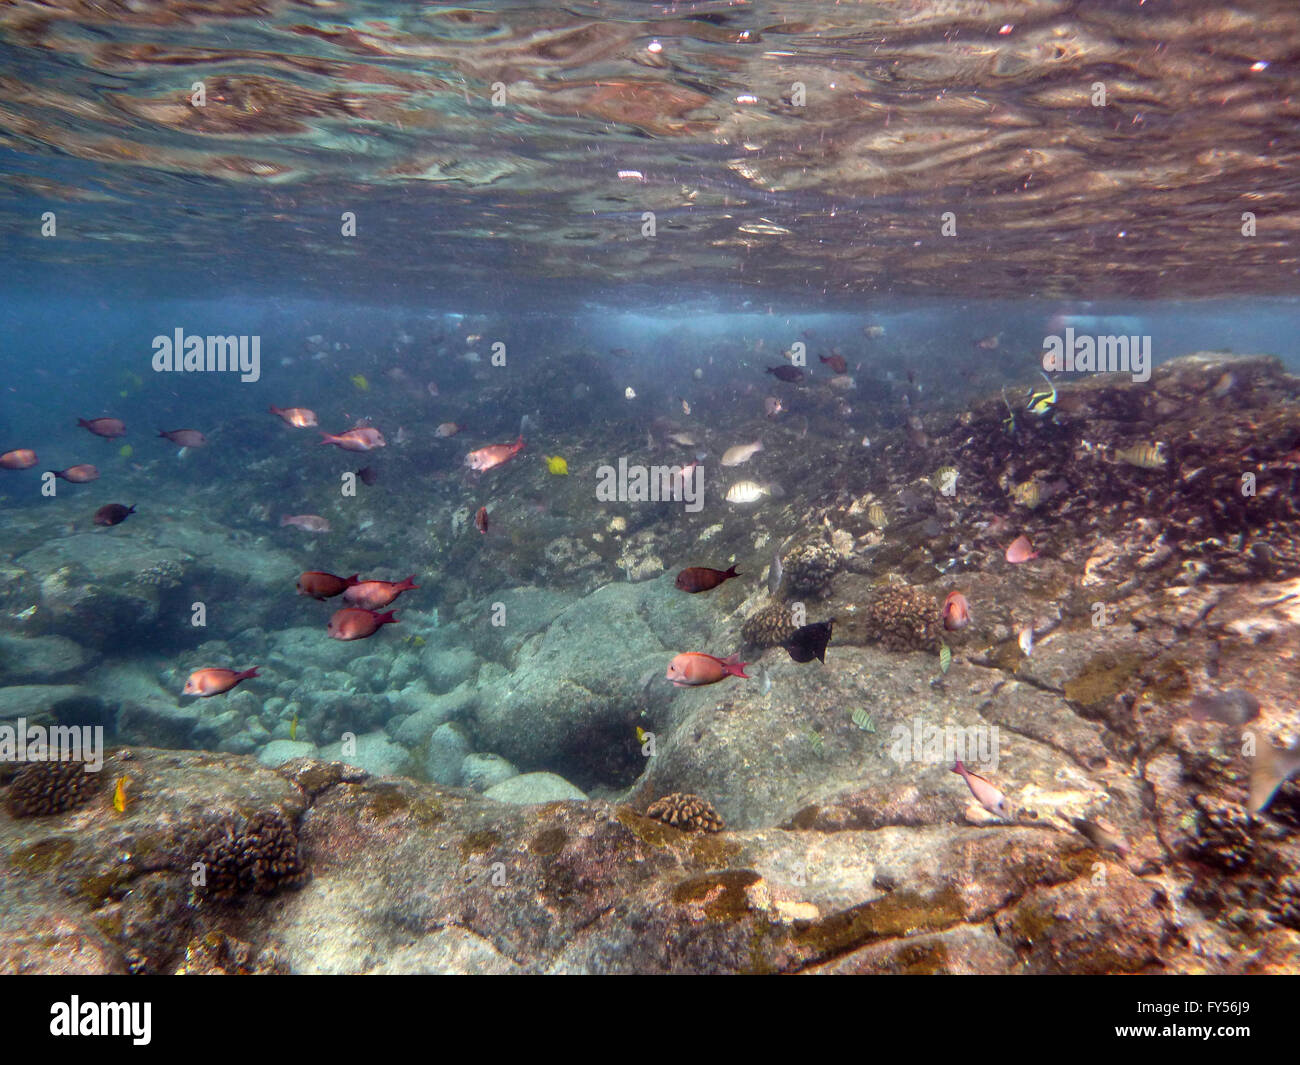 Fish of many colors, including yellow Tang, butterfly fish, swim in the shallow waters off the coast of the big Island, Hawaii. Stock Photo